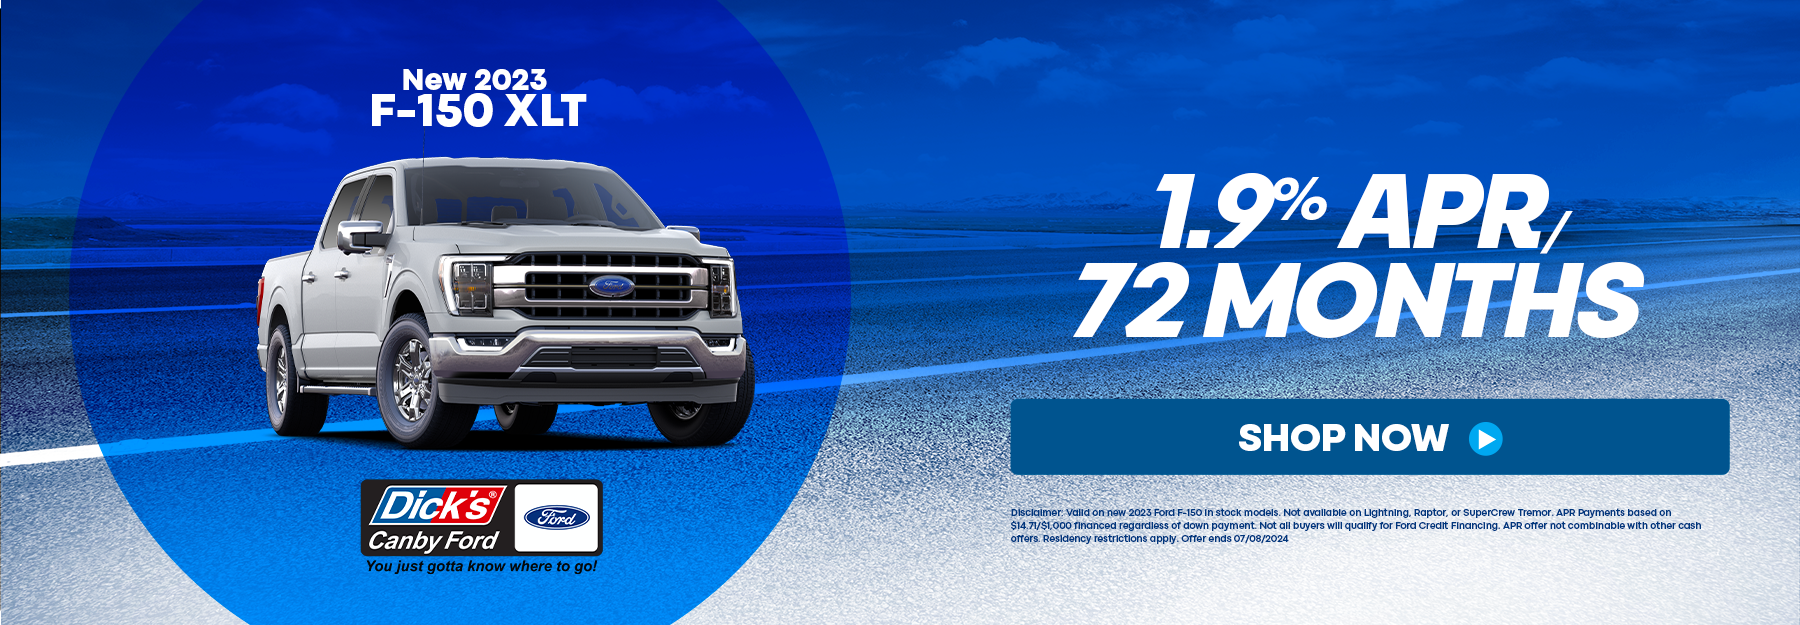 2023 F-150 XLT 1.9% APR for 72 months